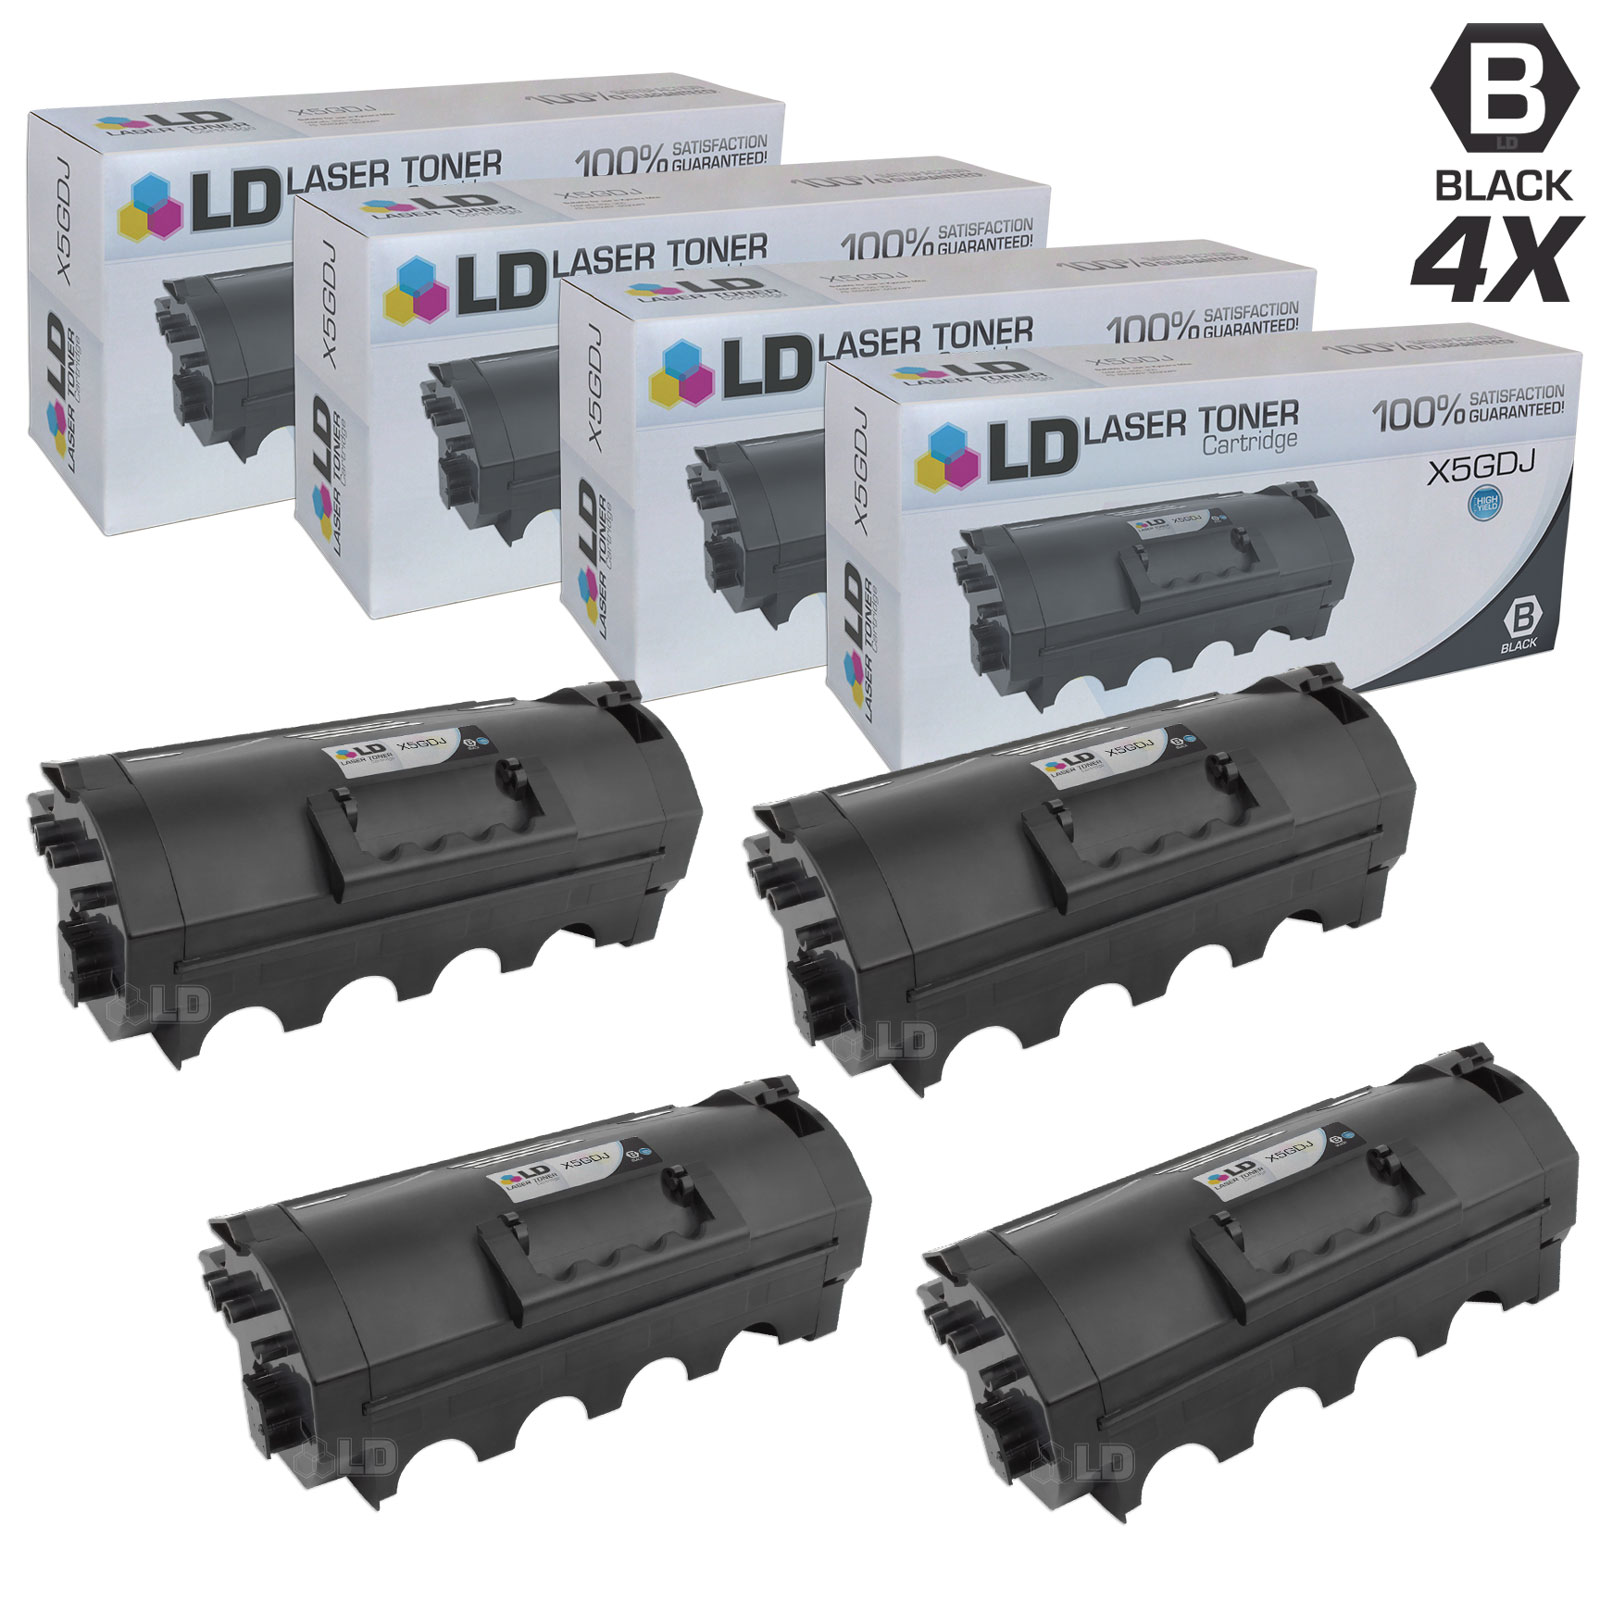 LD Compatible Replacements for Dell 331-9756 (X5GDJ) Set of 4 HY Black Laser Toner Cartridges for use in Dell Laser B5460dn, and B5465dnf s - image 1 of 1